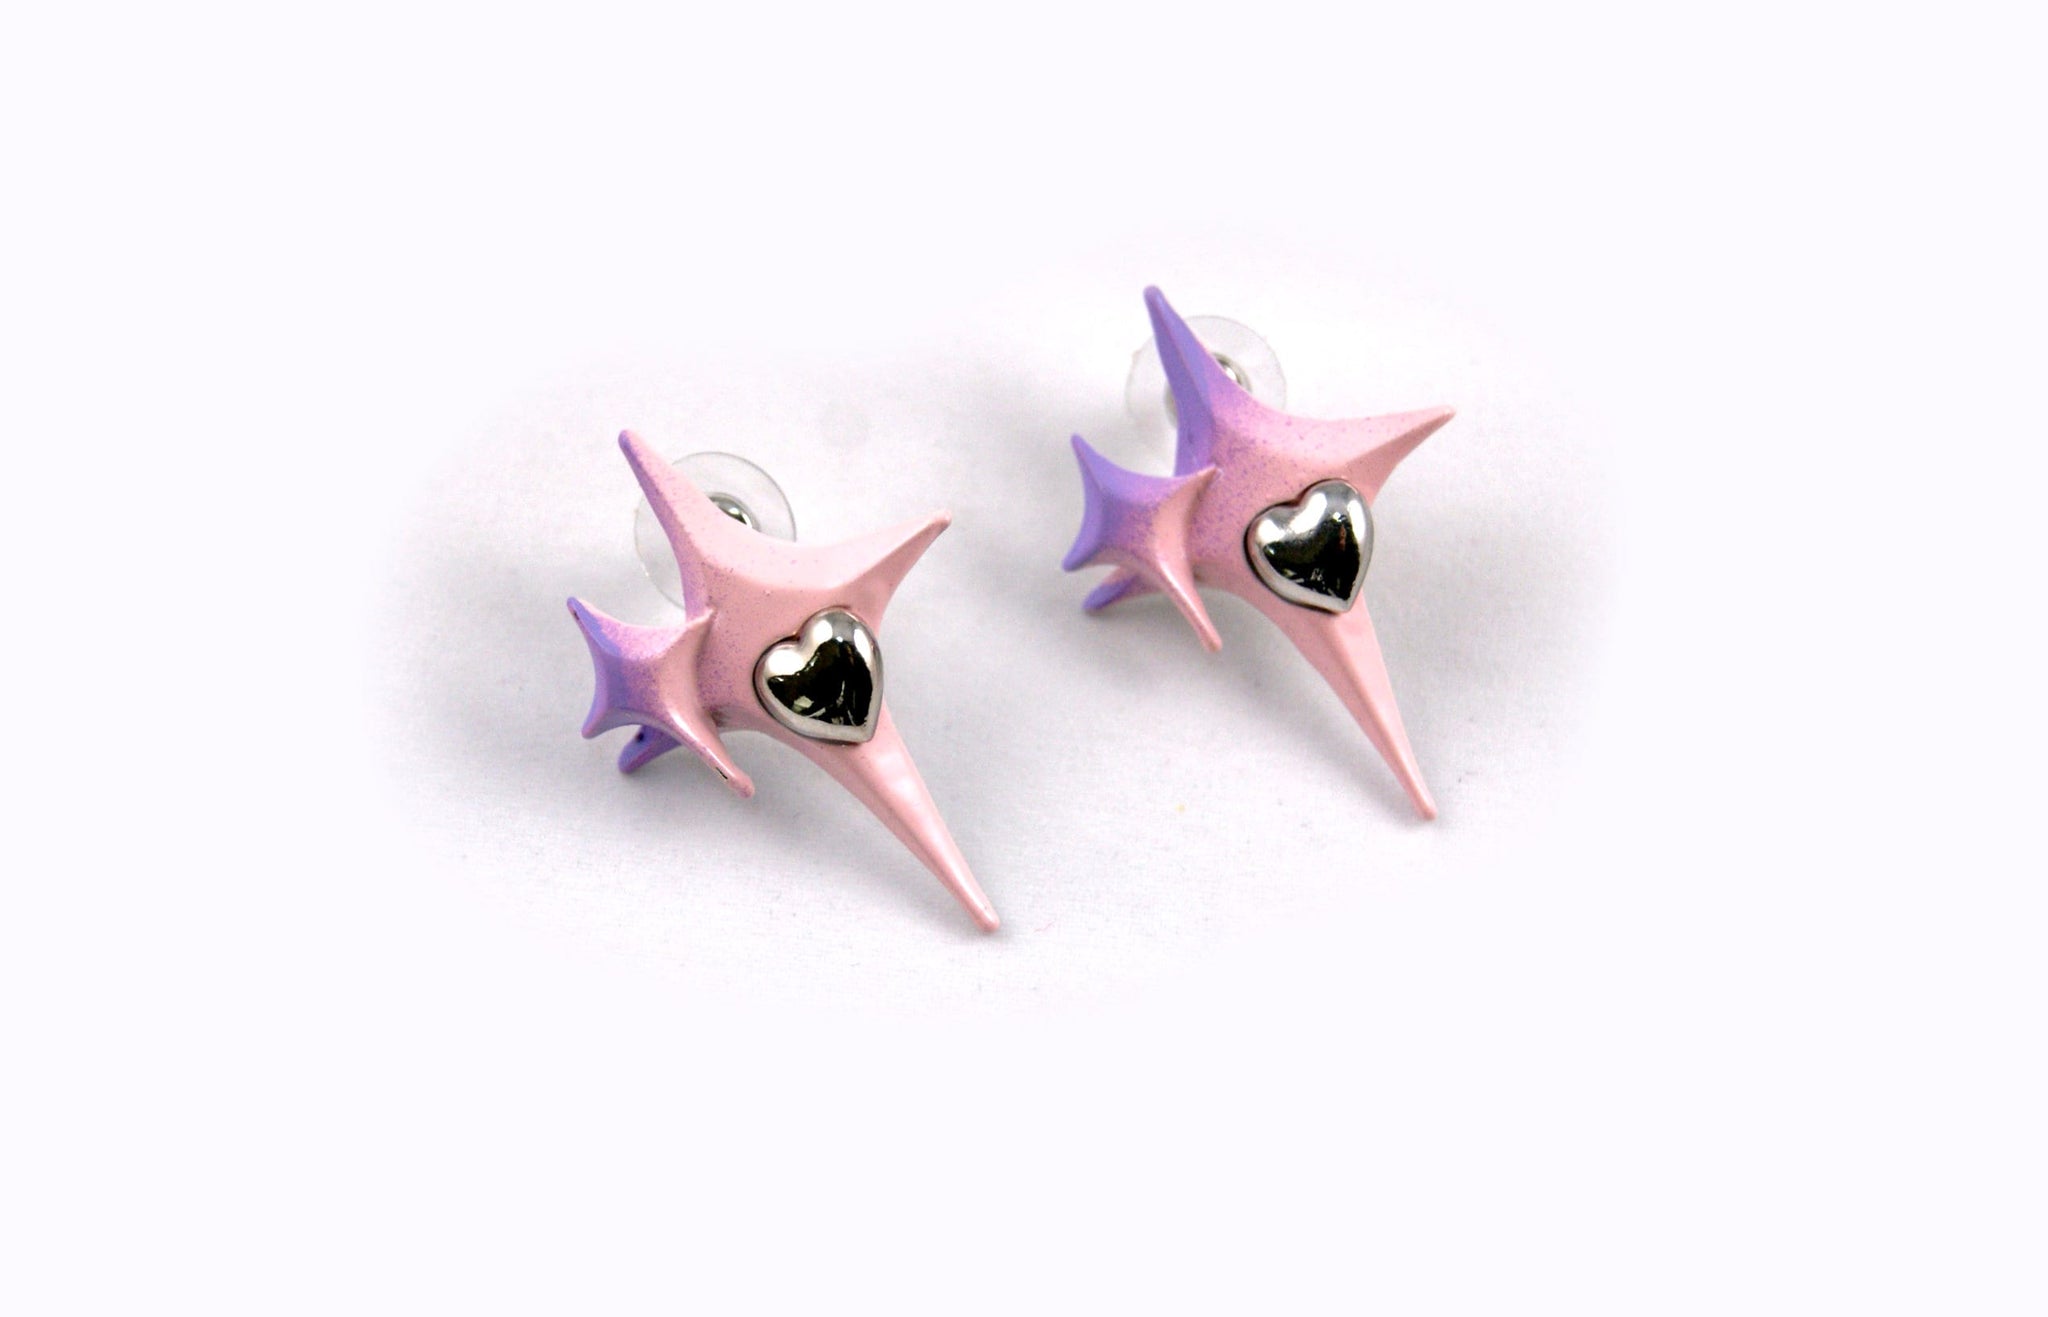 The Pastel Sparkle Enamel Earrings | A Super Kawaii Stud Accessory | Star Sparkle Shape with Hearts in Silver Pink and Purple | Goose Taffy